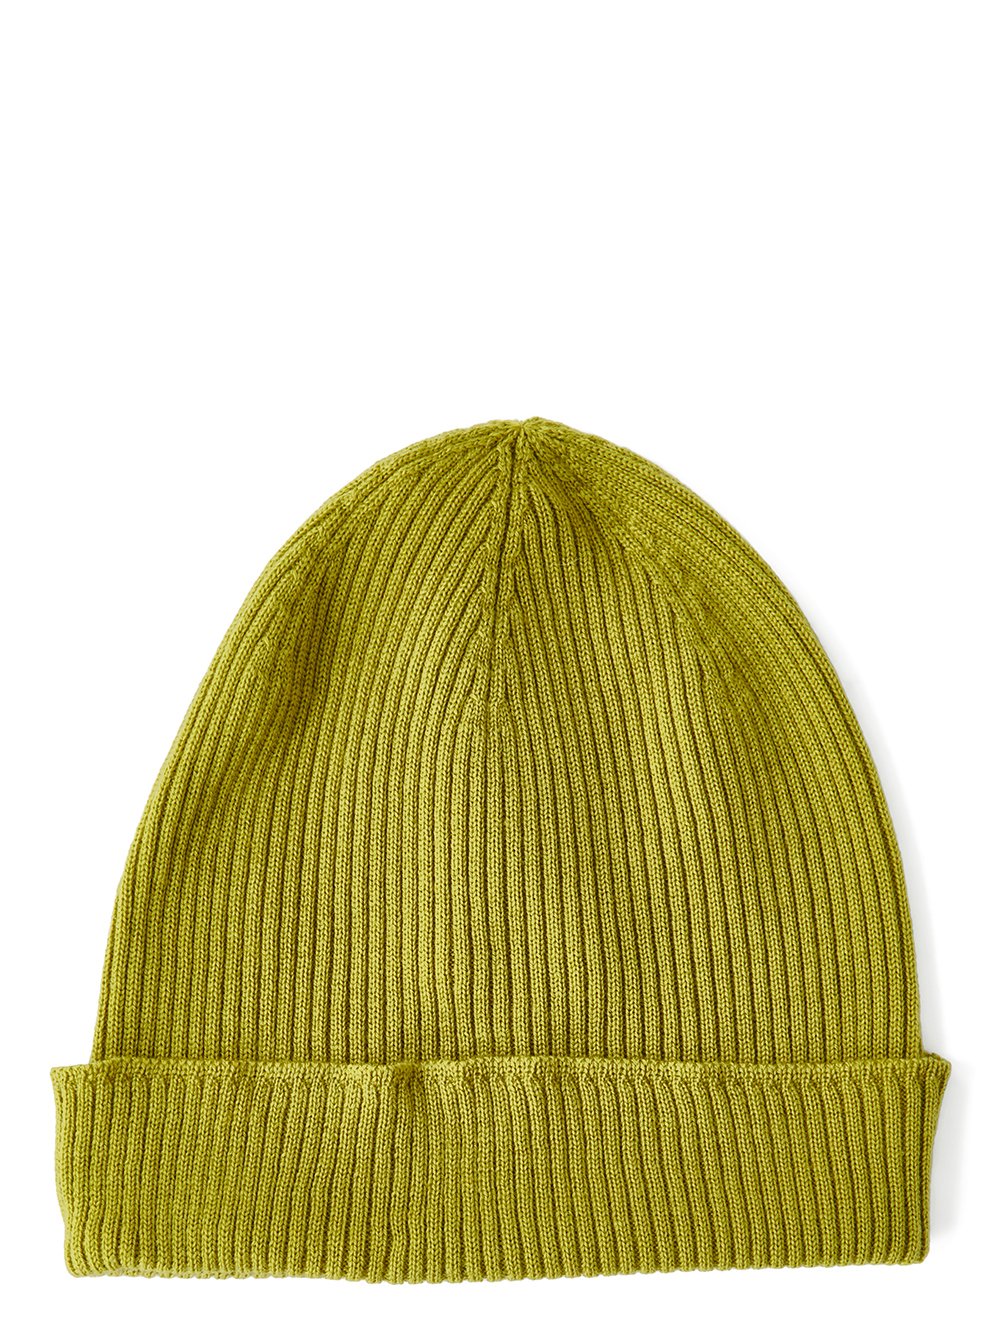 RICK OWENS FW23 LUXOR HAT IN ACID YELLOW LIGHTWEIGHT RIBBED KNIT